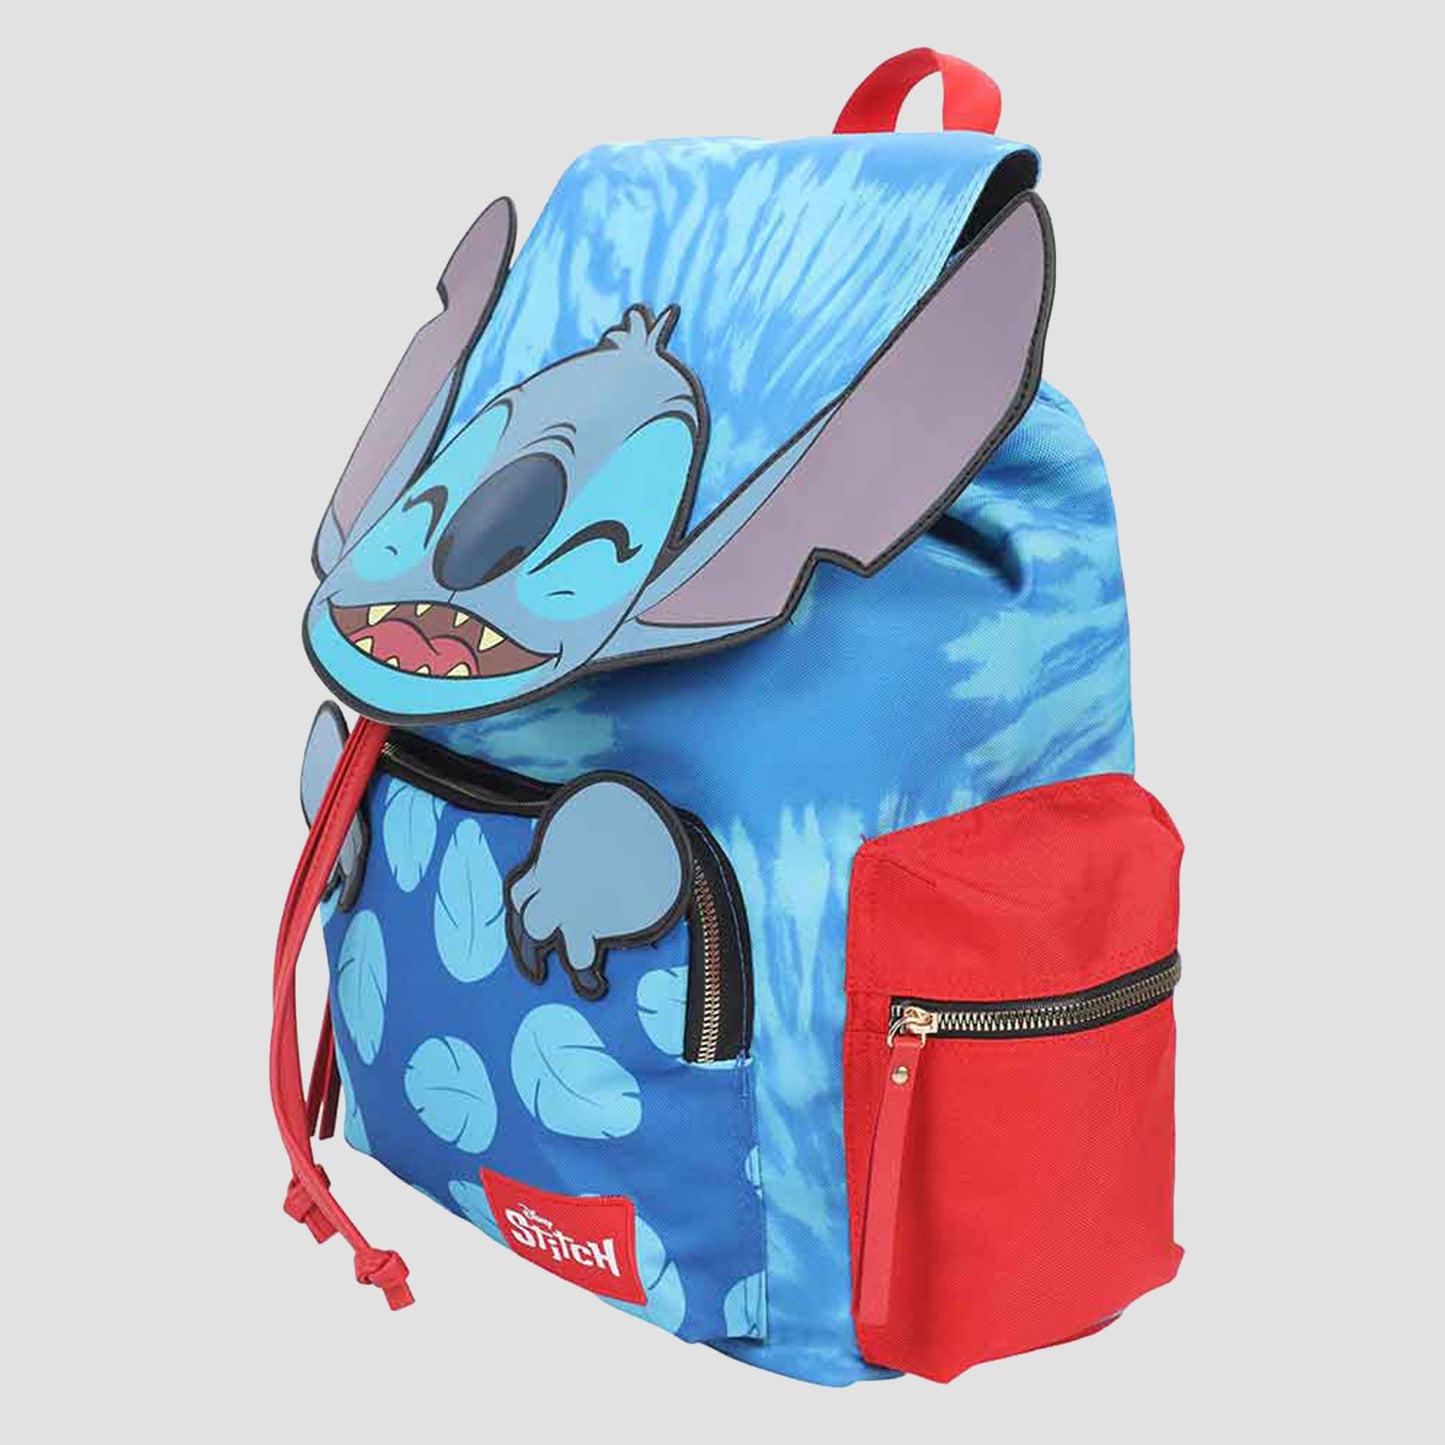 Load image into Gallery viewer, Stitch (Lilo and Stitch) Disney 3D Rucksack Backpack
